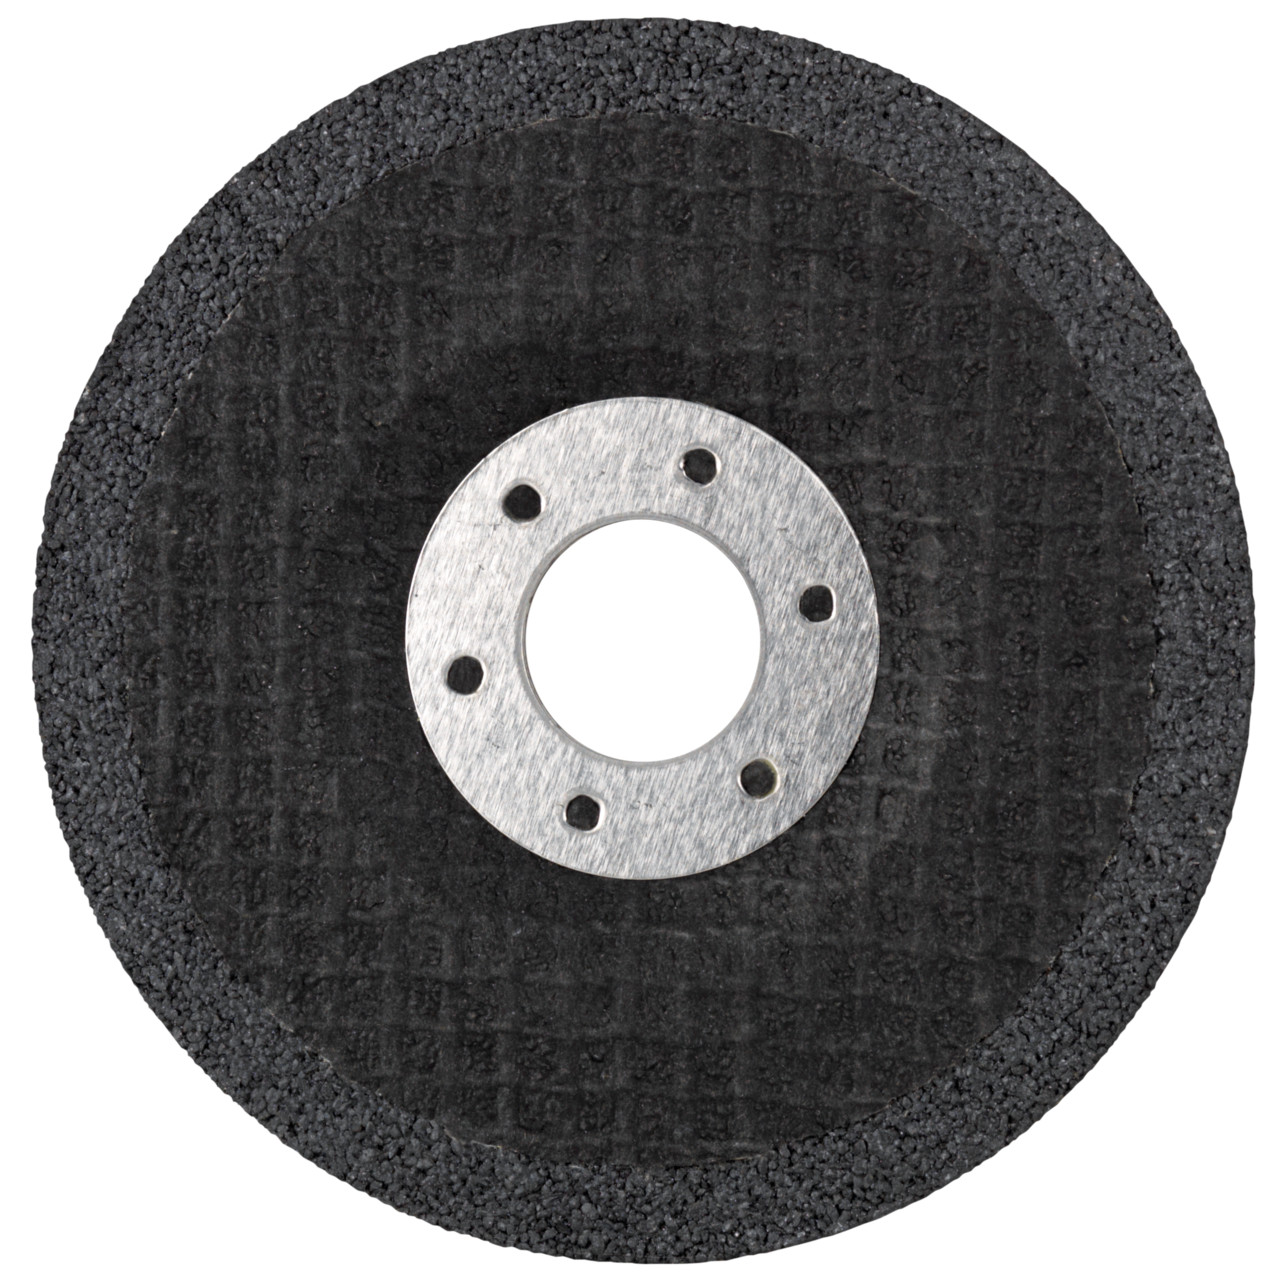 TYROLIT cut-off wheel CUT AND GRIND DxUxH 178x3.5x22.23 2in1 for steel and stainless steel, shape: 27EC - offset version (CUT AND GRIND) , Art. 743947